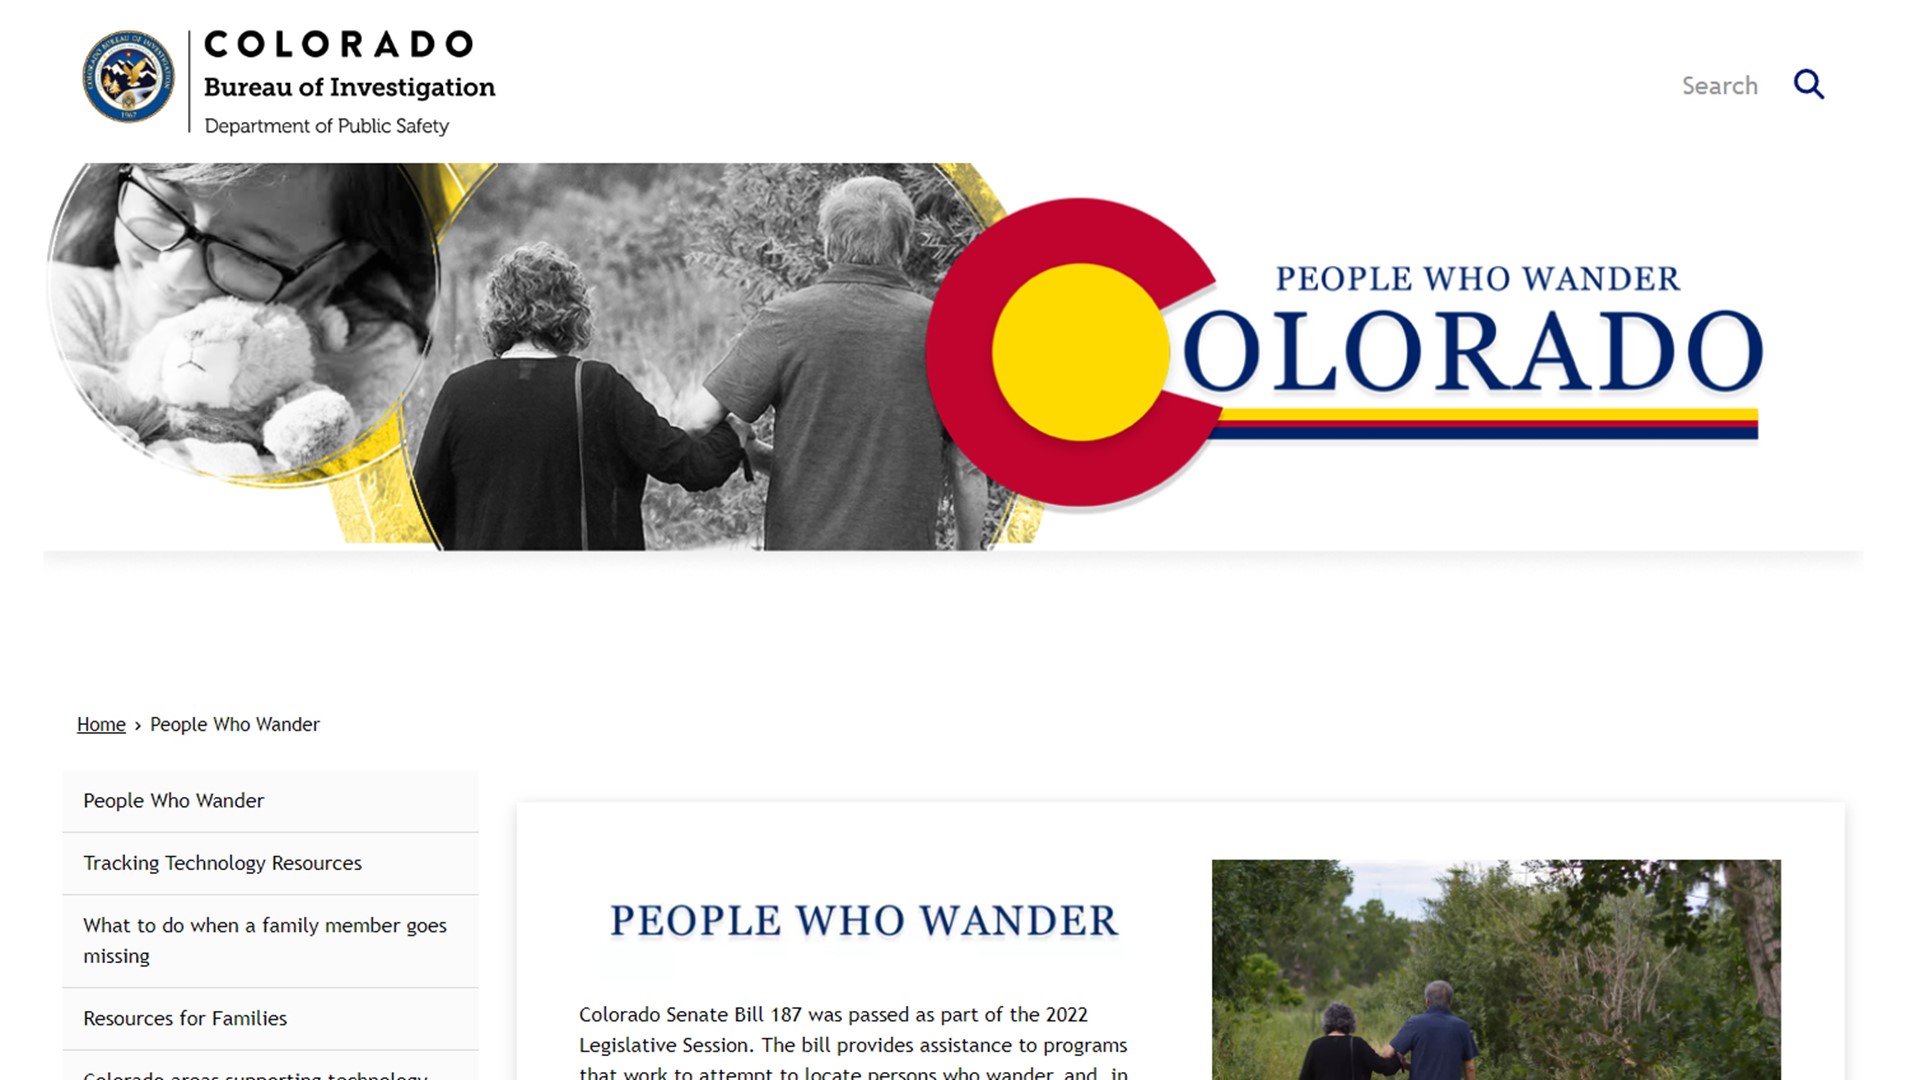 The Colorado Bureau of Investigation on Monday launched a new website designed to help families of people who wander.